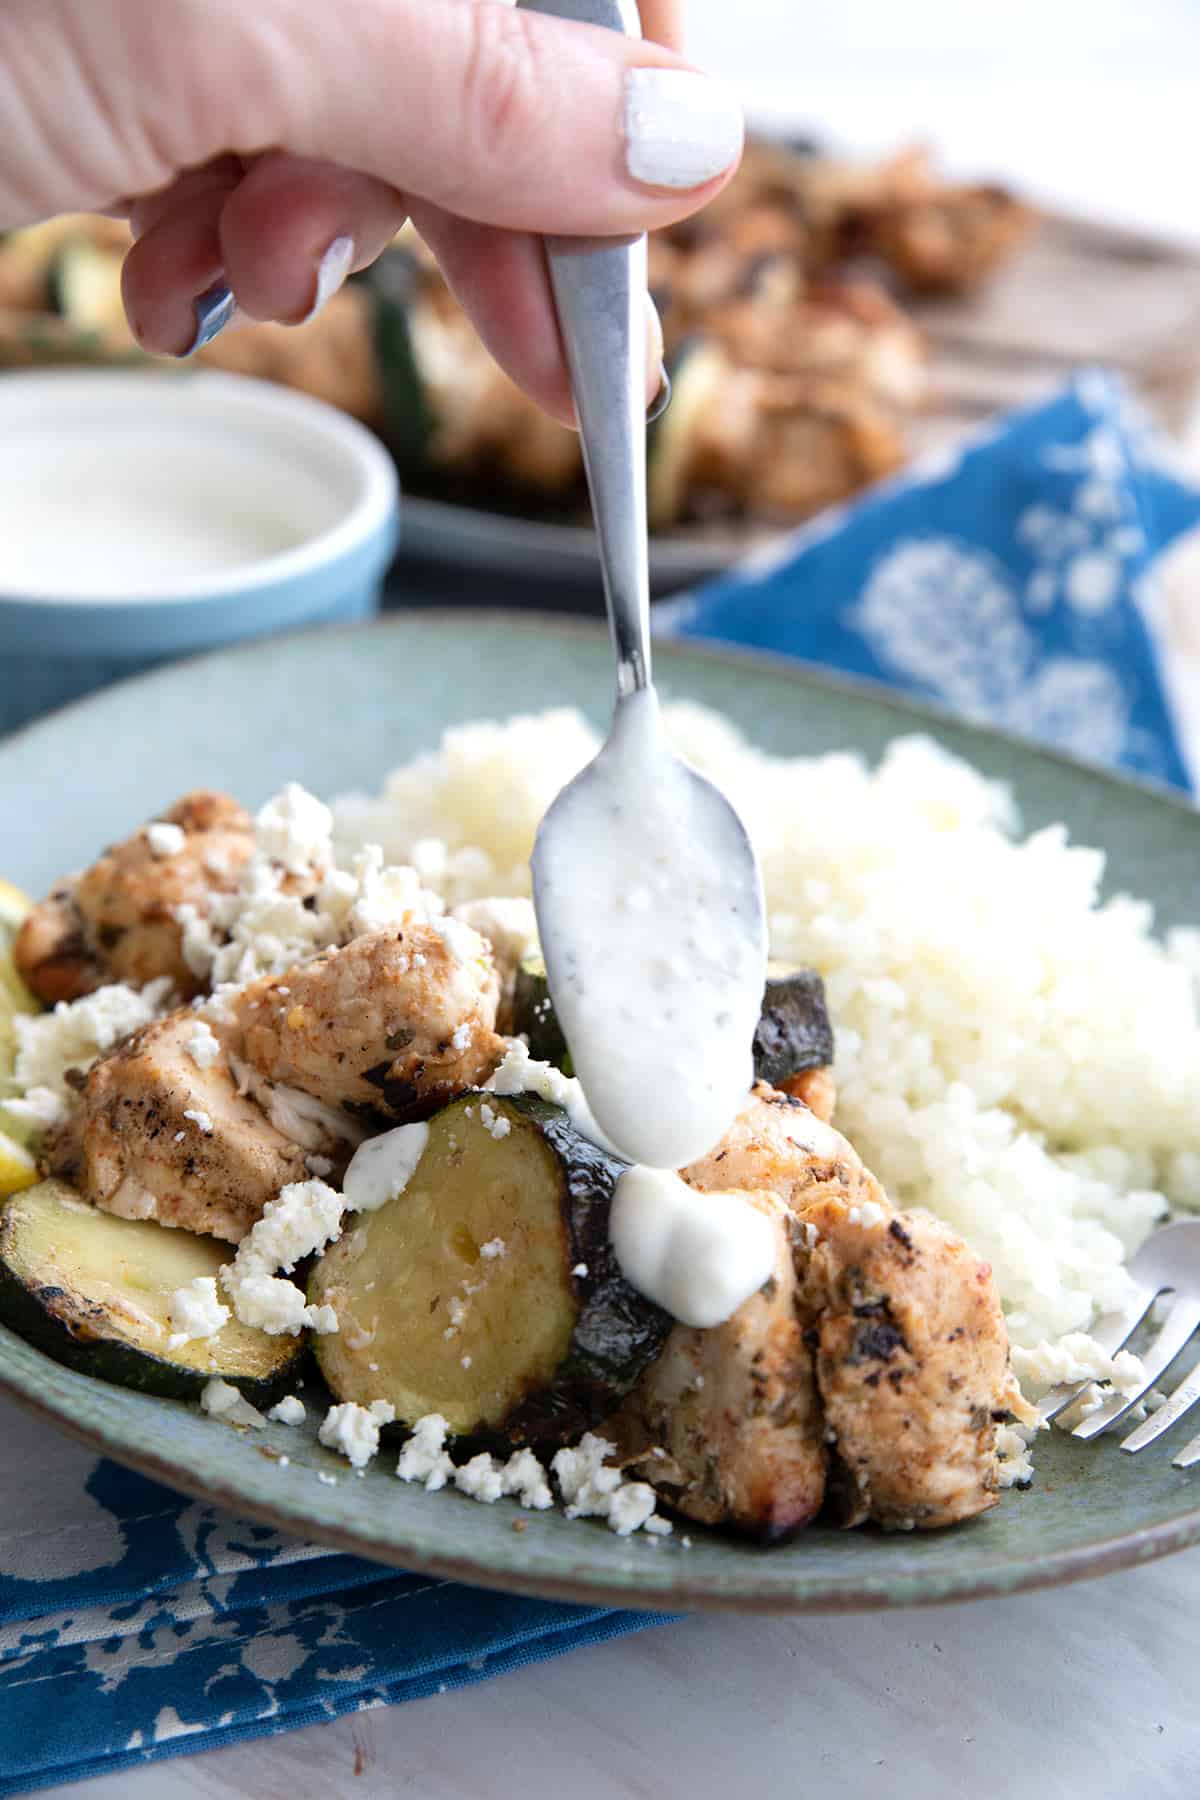 Feta dressing being drizzled over Chicken Souvlaki.